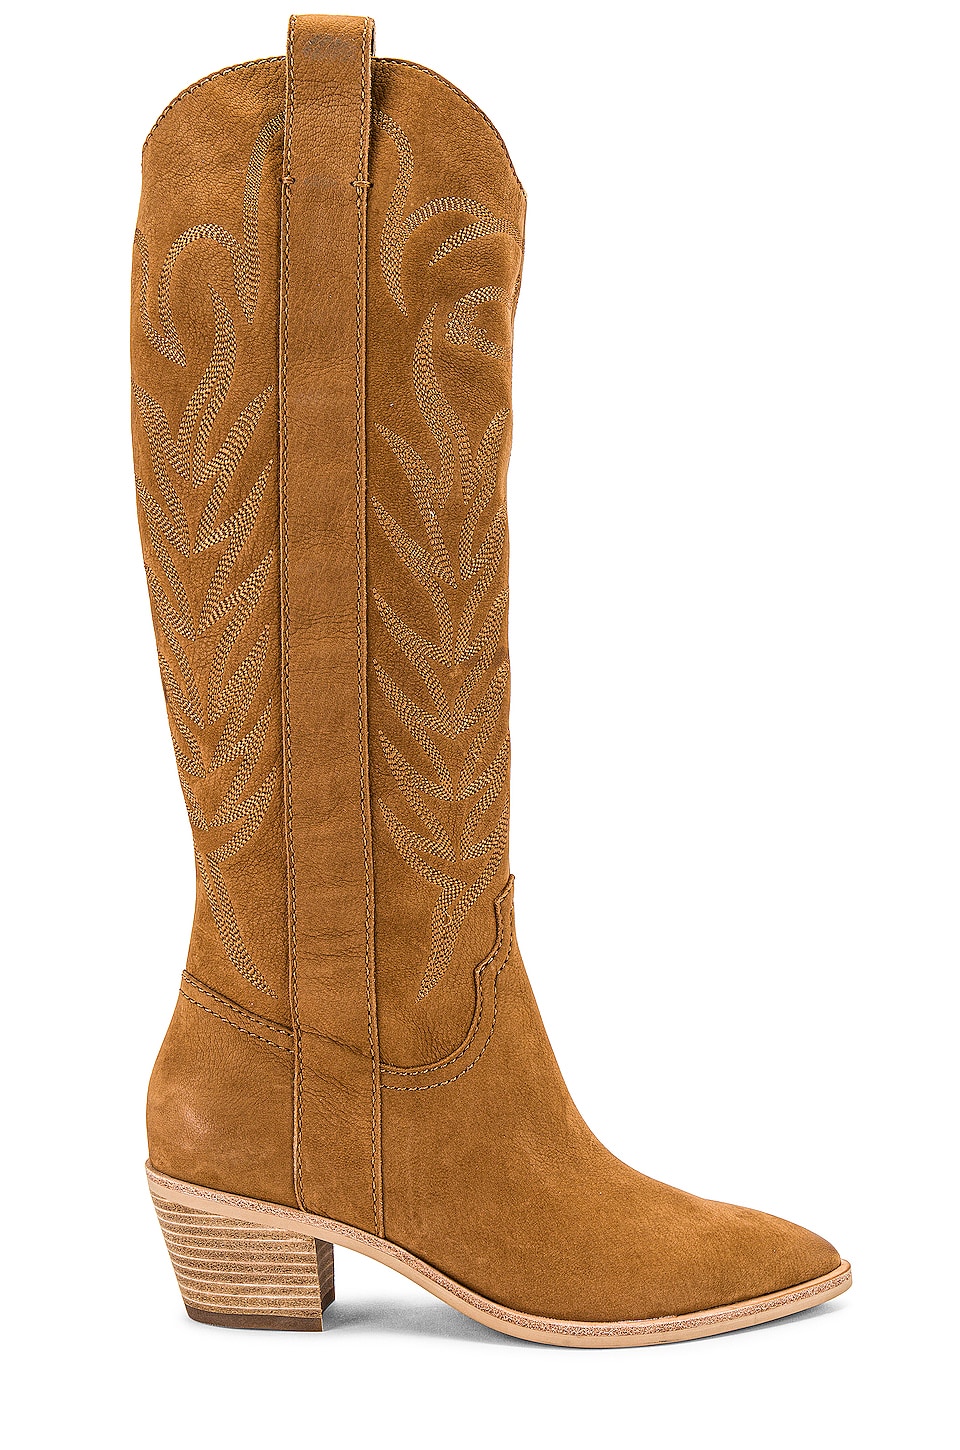 Dolce Vita Solei Boot in Whiskey